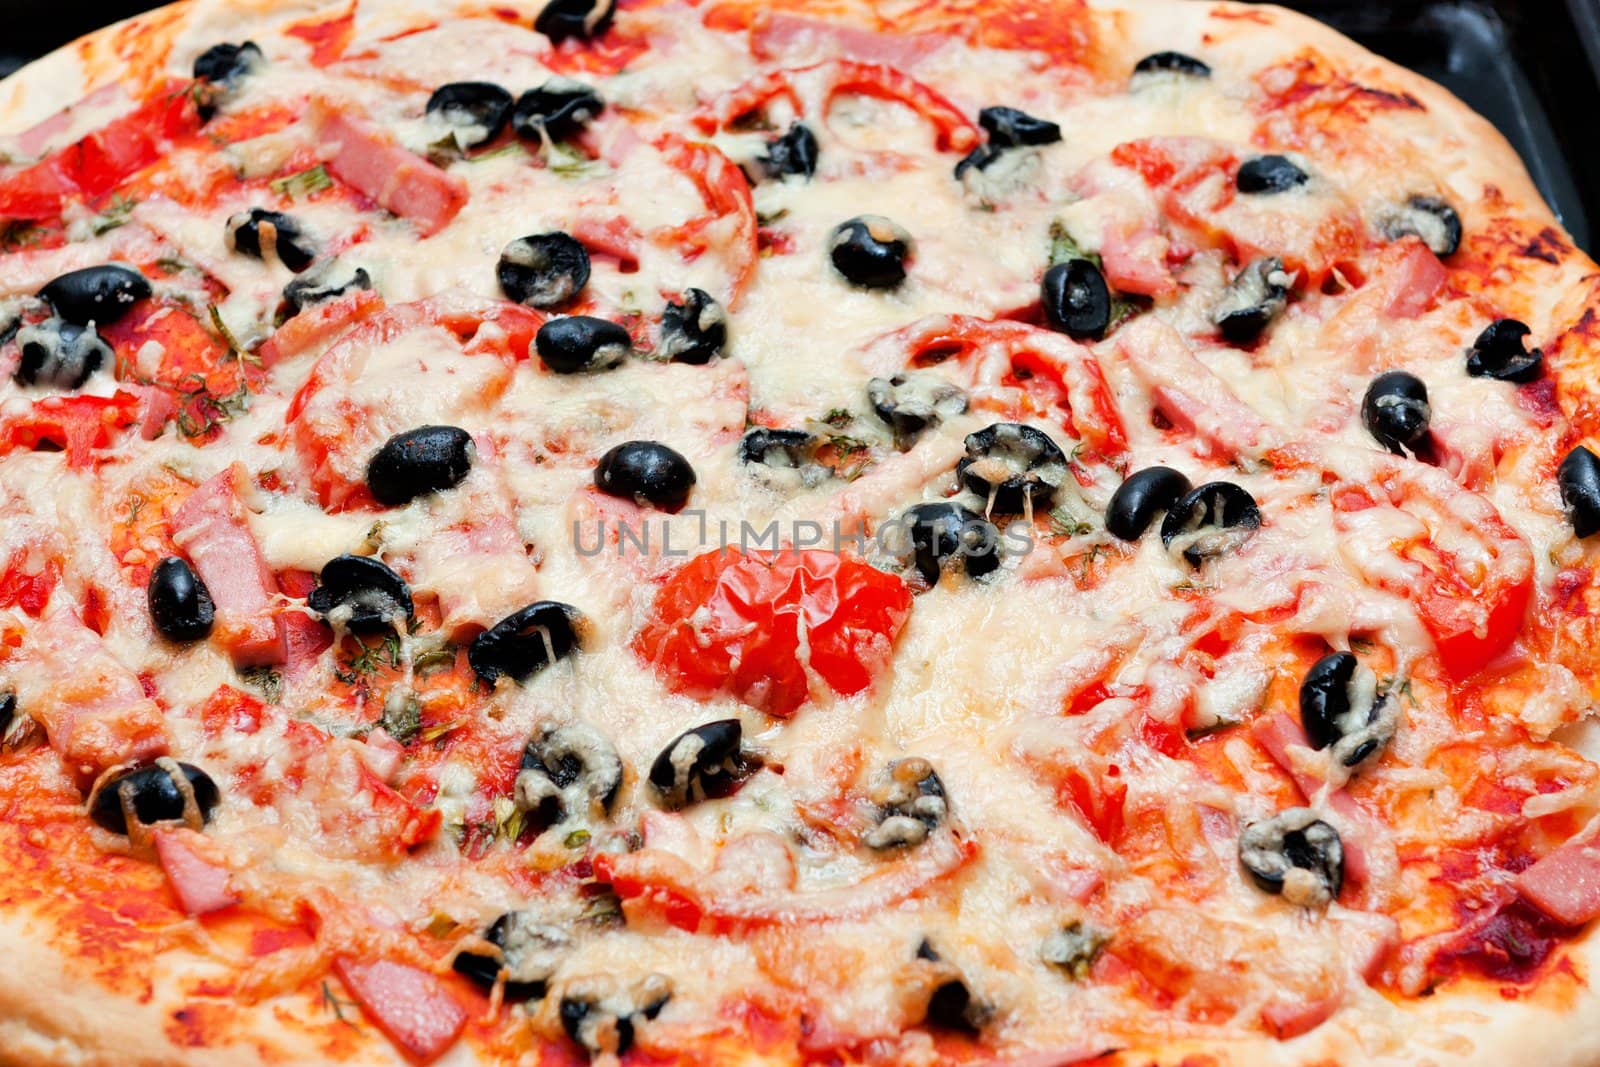 The pizza with tomato, olive and cheese.